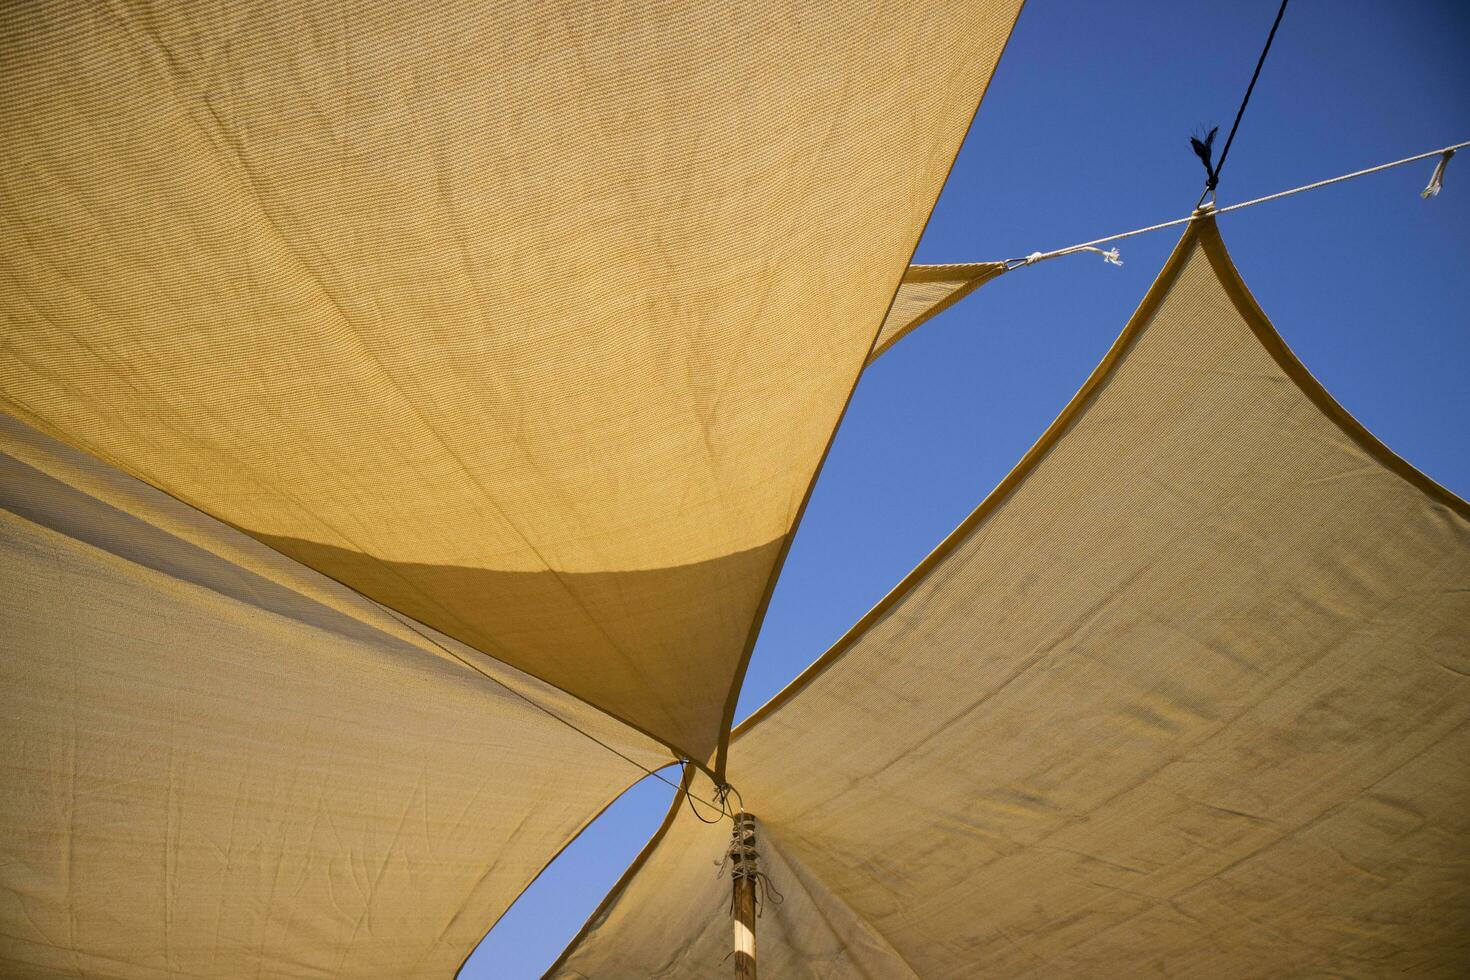 Sails for sun protection photo